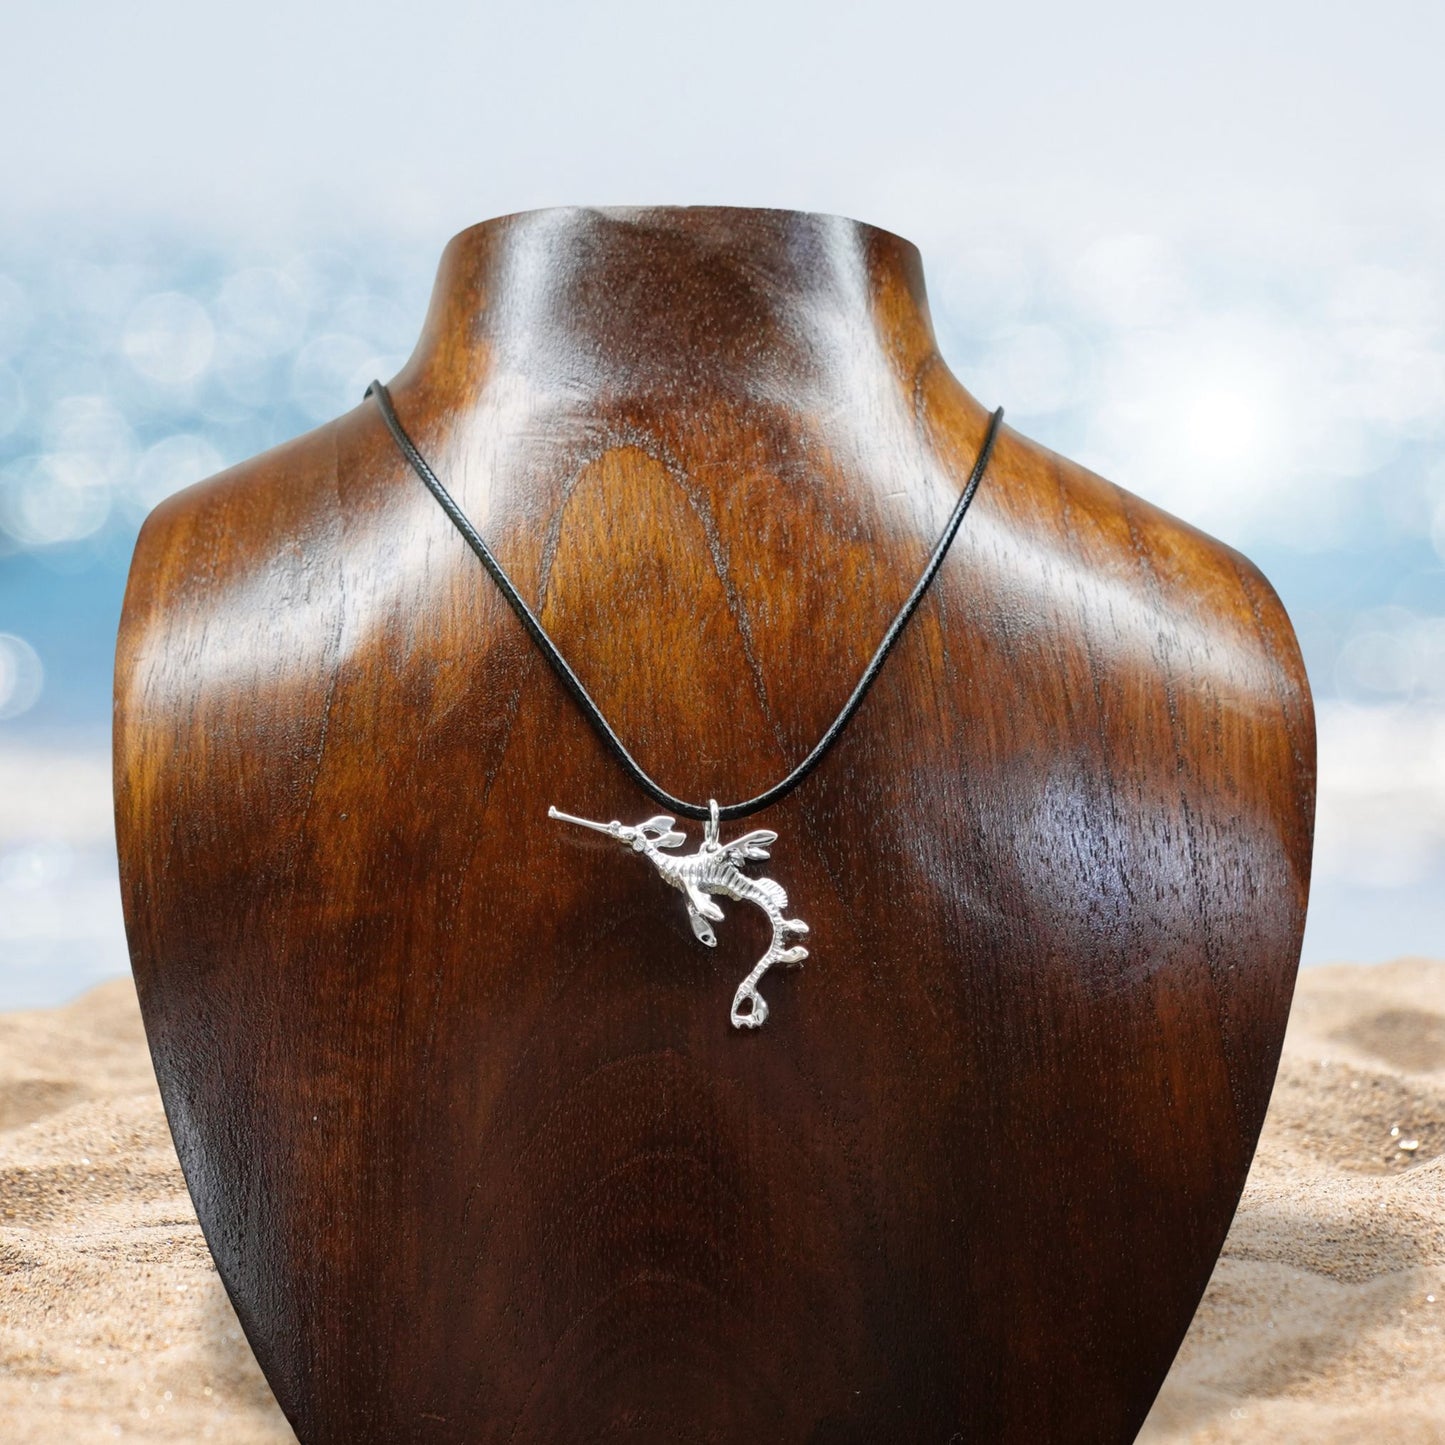 Weedy Sea Dragon necklace. Made from highly polished, tarnish resistant silver, strung on a strong cord. © Adrian Ashley